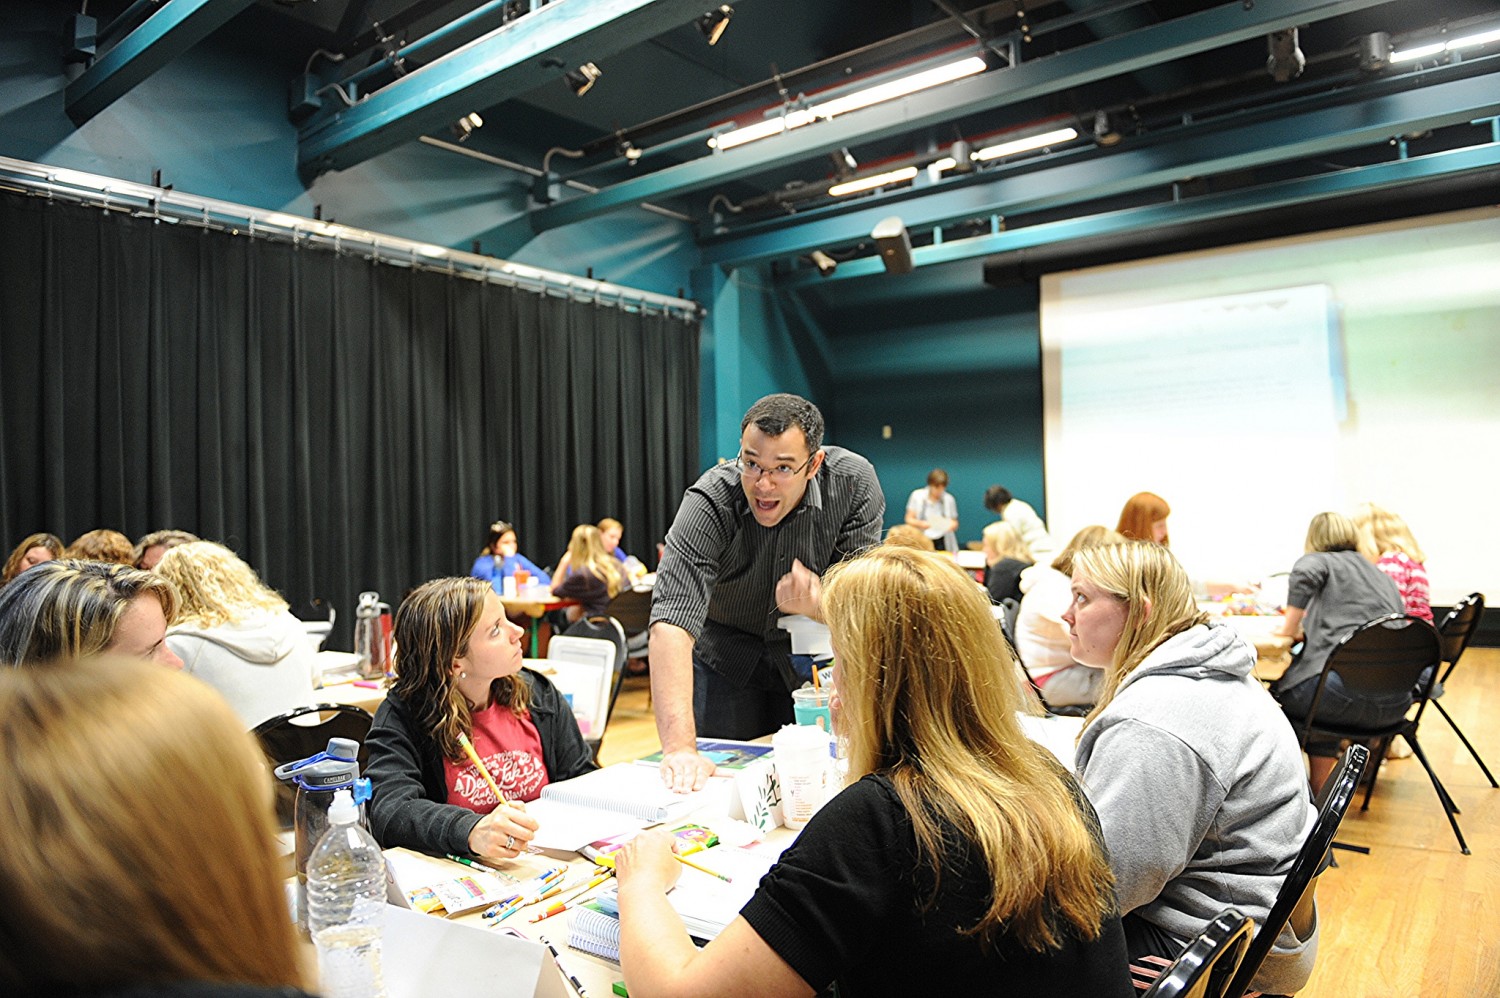 Cameron Hill, assistant professor of mathematics, taught an Intel Math course to area teachers as part of the Green Street Teaching and Learning Center's K-8 Math Institute. The Department of Education recently awarded GSTLC with a grant to expand its program and reach 90 teachers from three new school districts. 